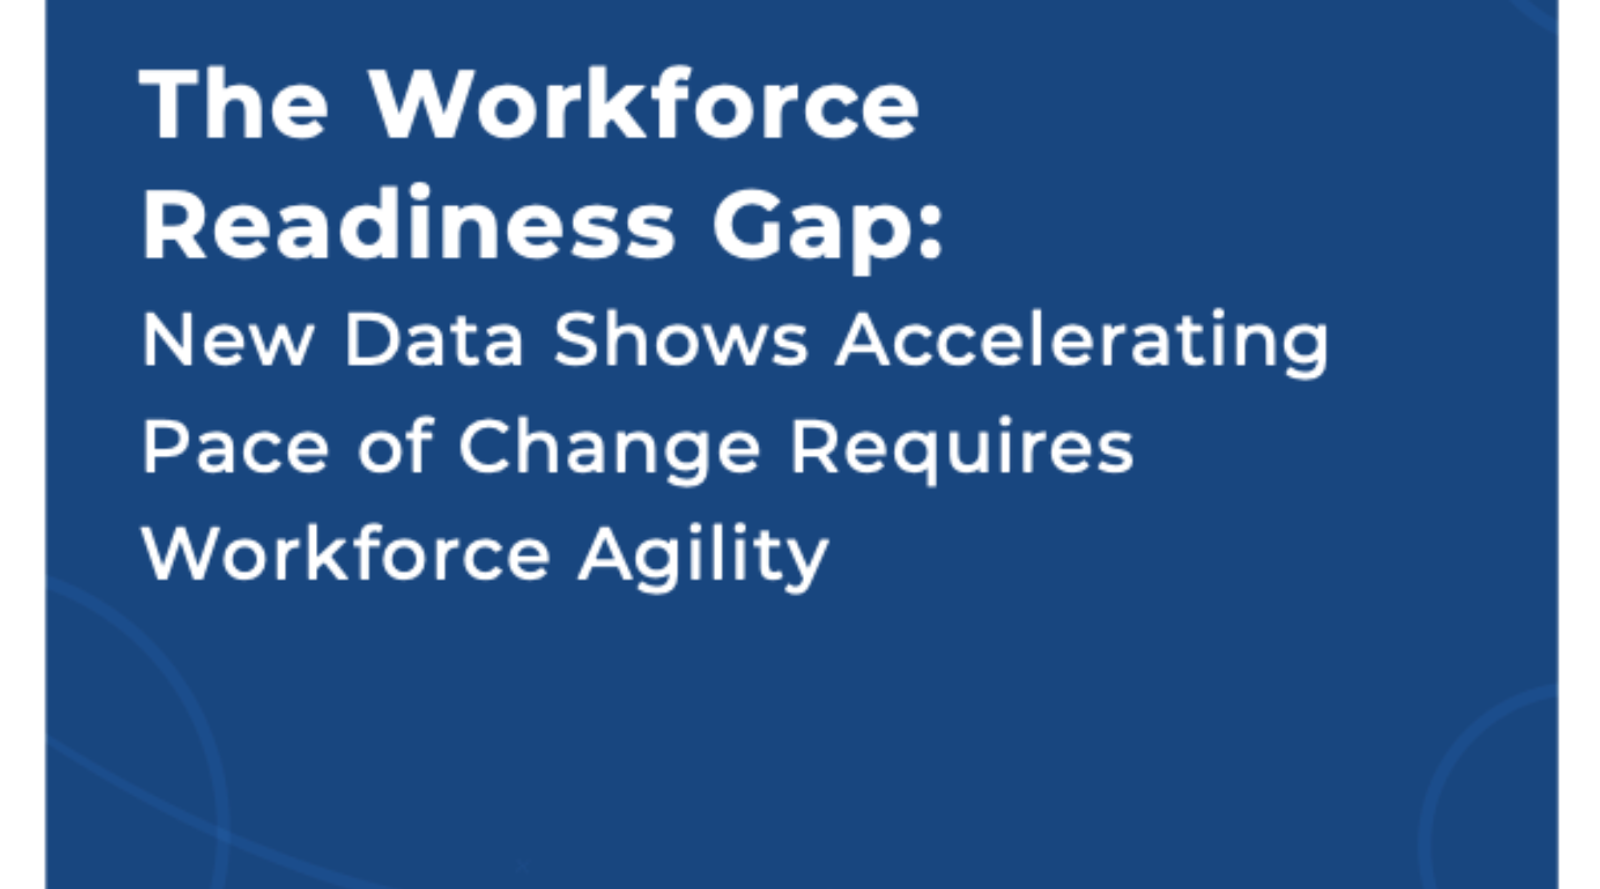 Lighthouse Research & Advisory – The Workforce Readiness Gap: New Data Shows Accelerating Pace of Change Requires Workforce Agility